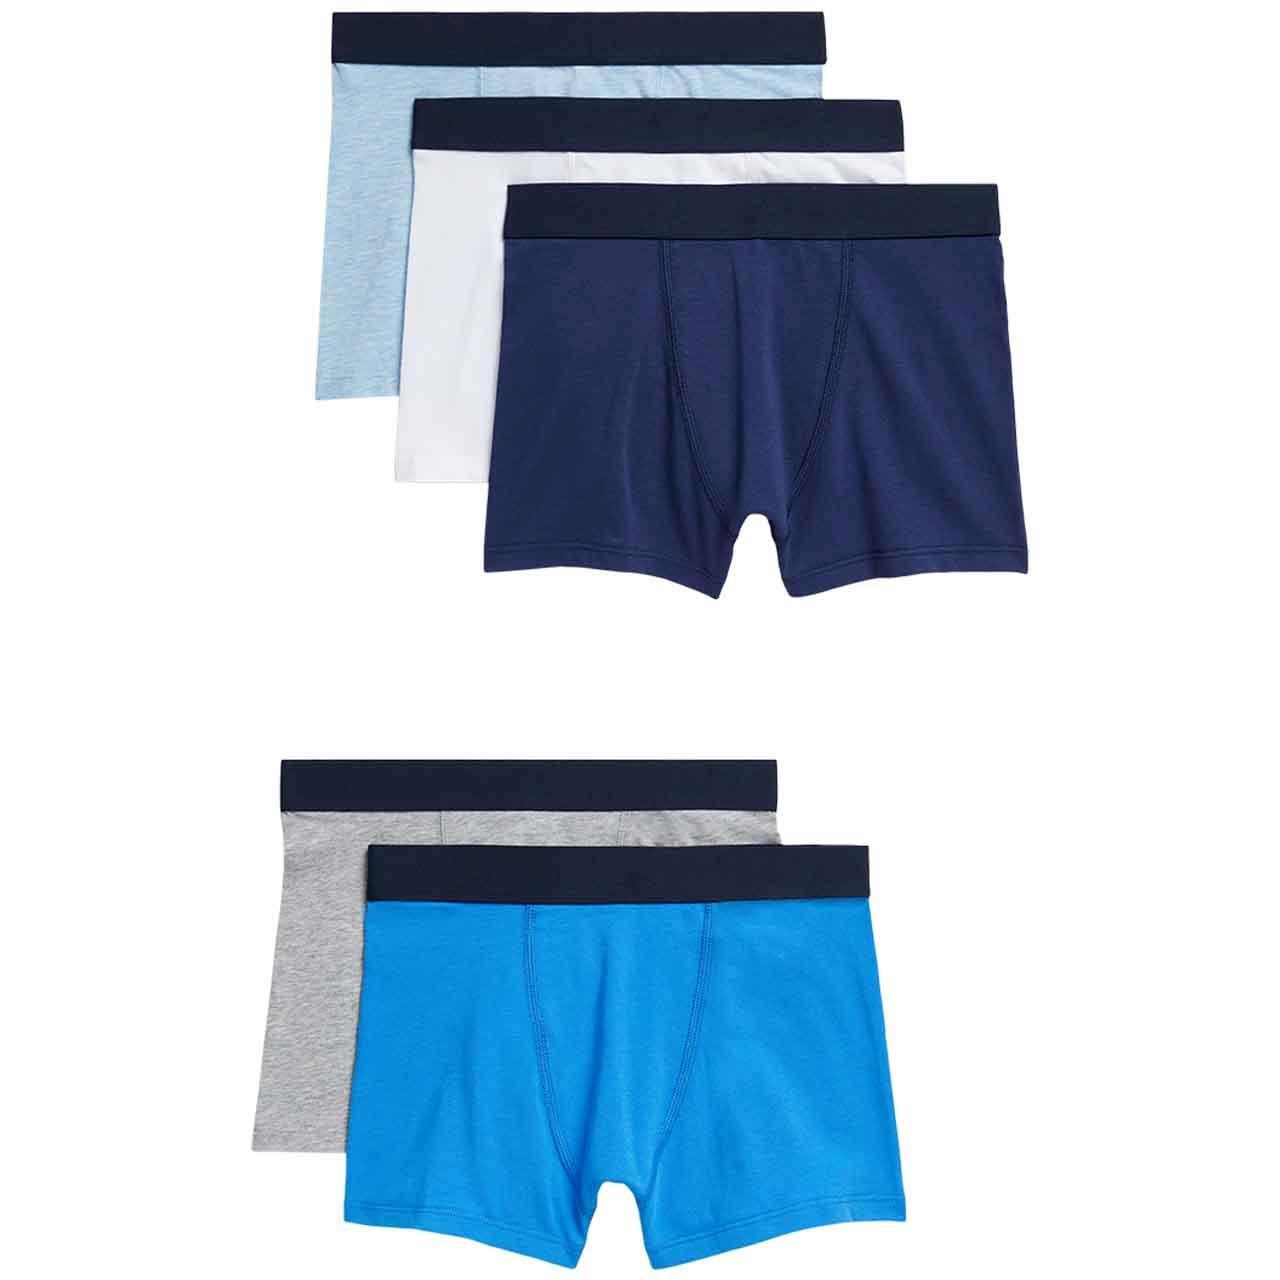 M&S Boys Cotton Rich Trunks, 6-7 Years, Blue, 5 Pack